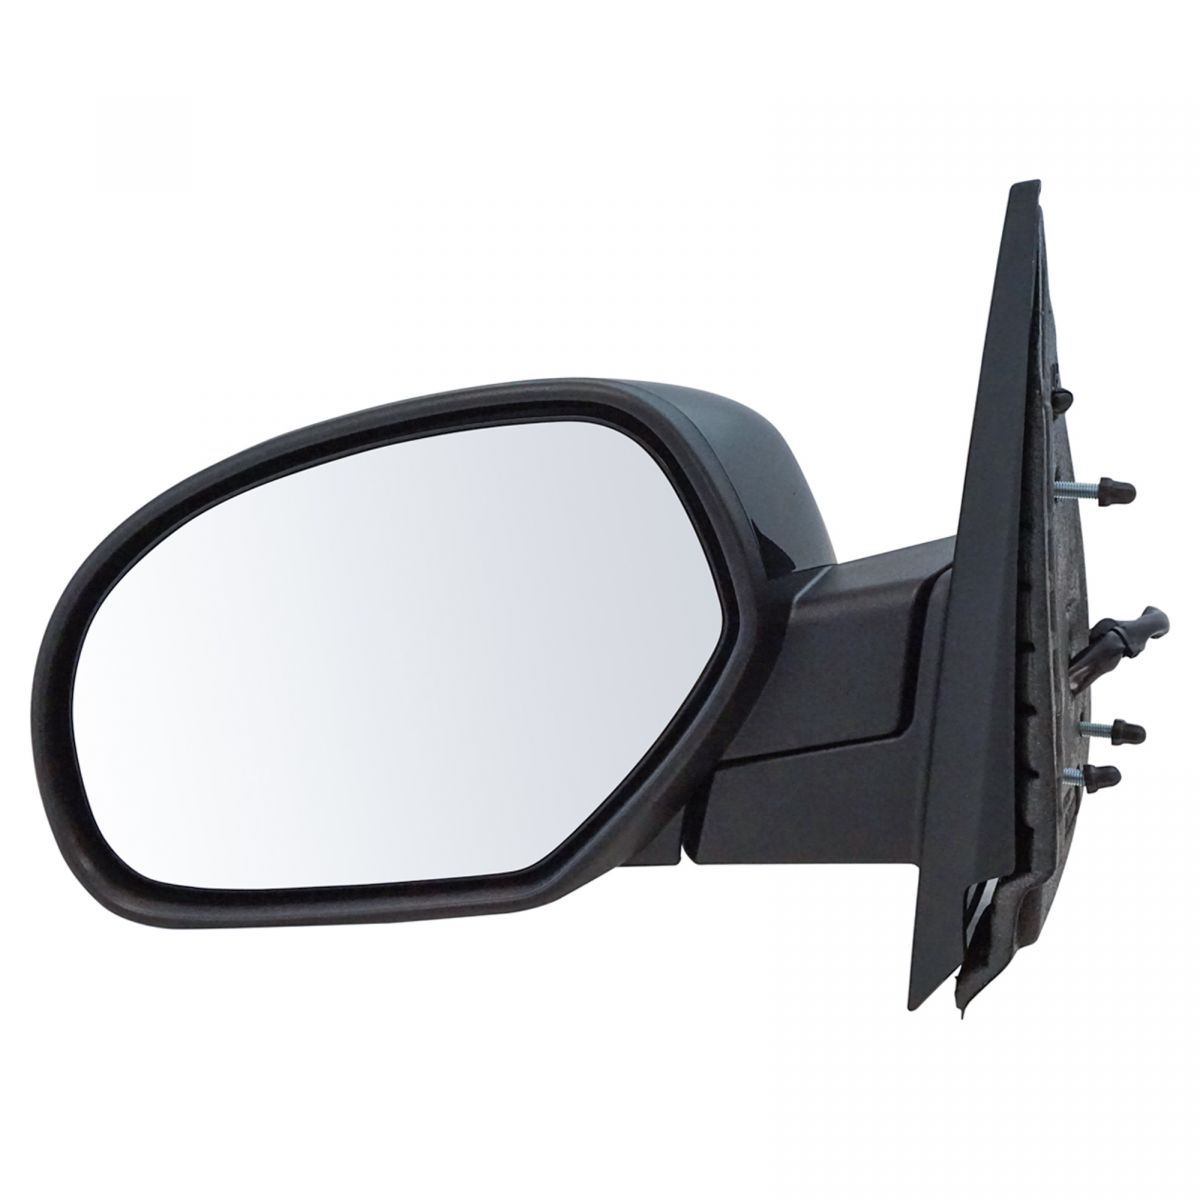 Black OE Style Replacement Side Mirrors for 2007-13 Chevy Silverado//GMC Sierra 1500 Powered Right Side Only Heated